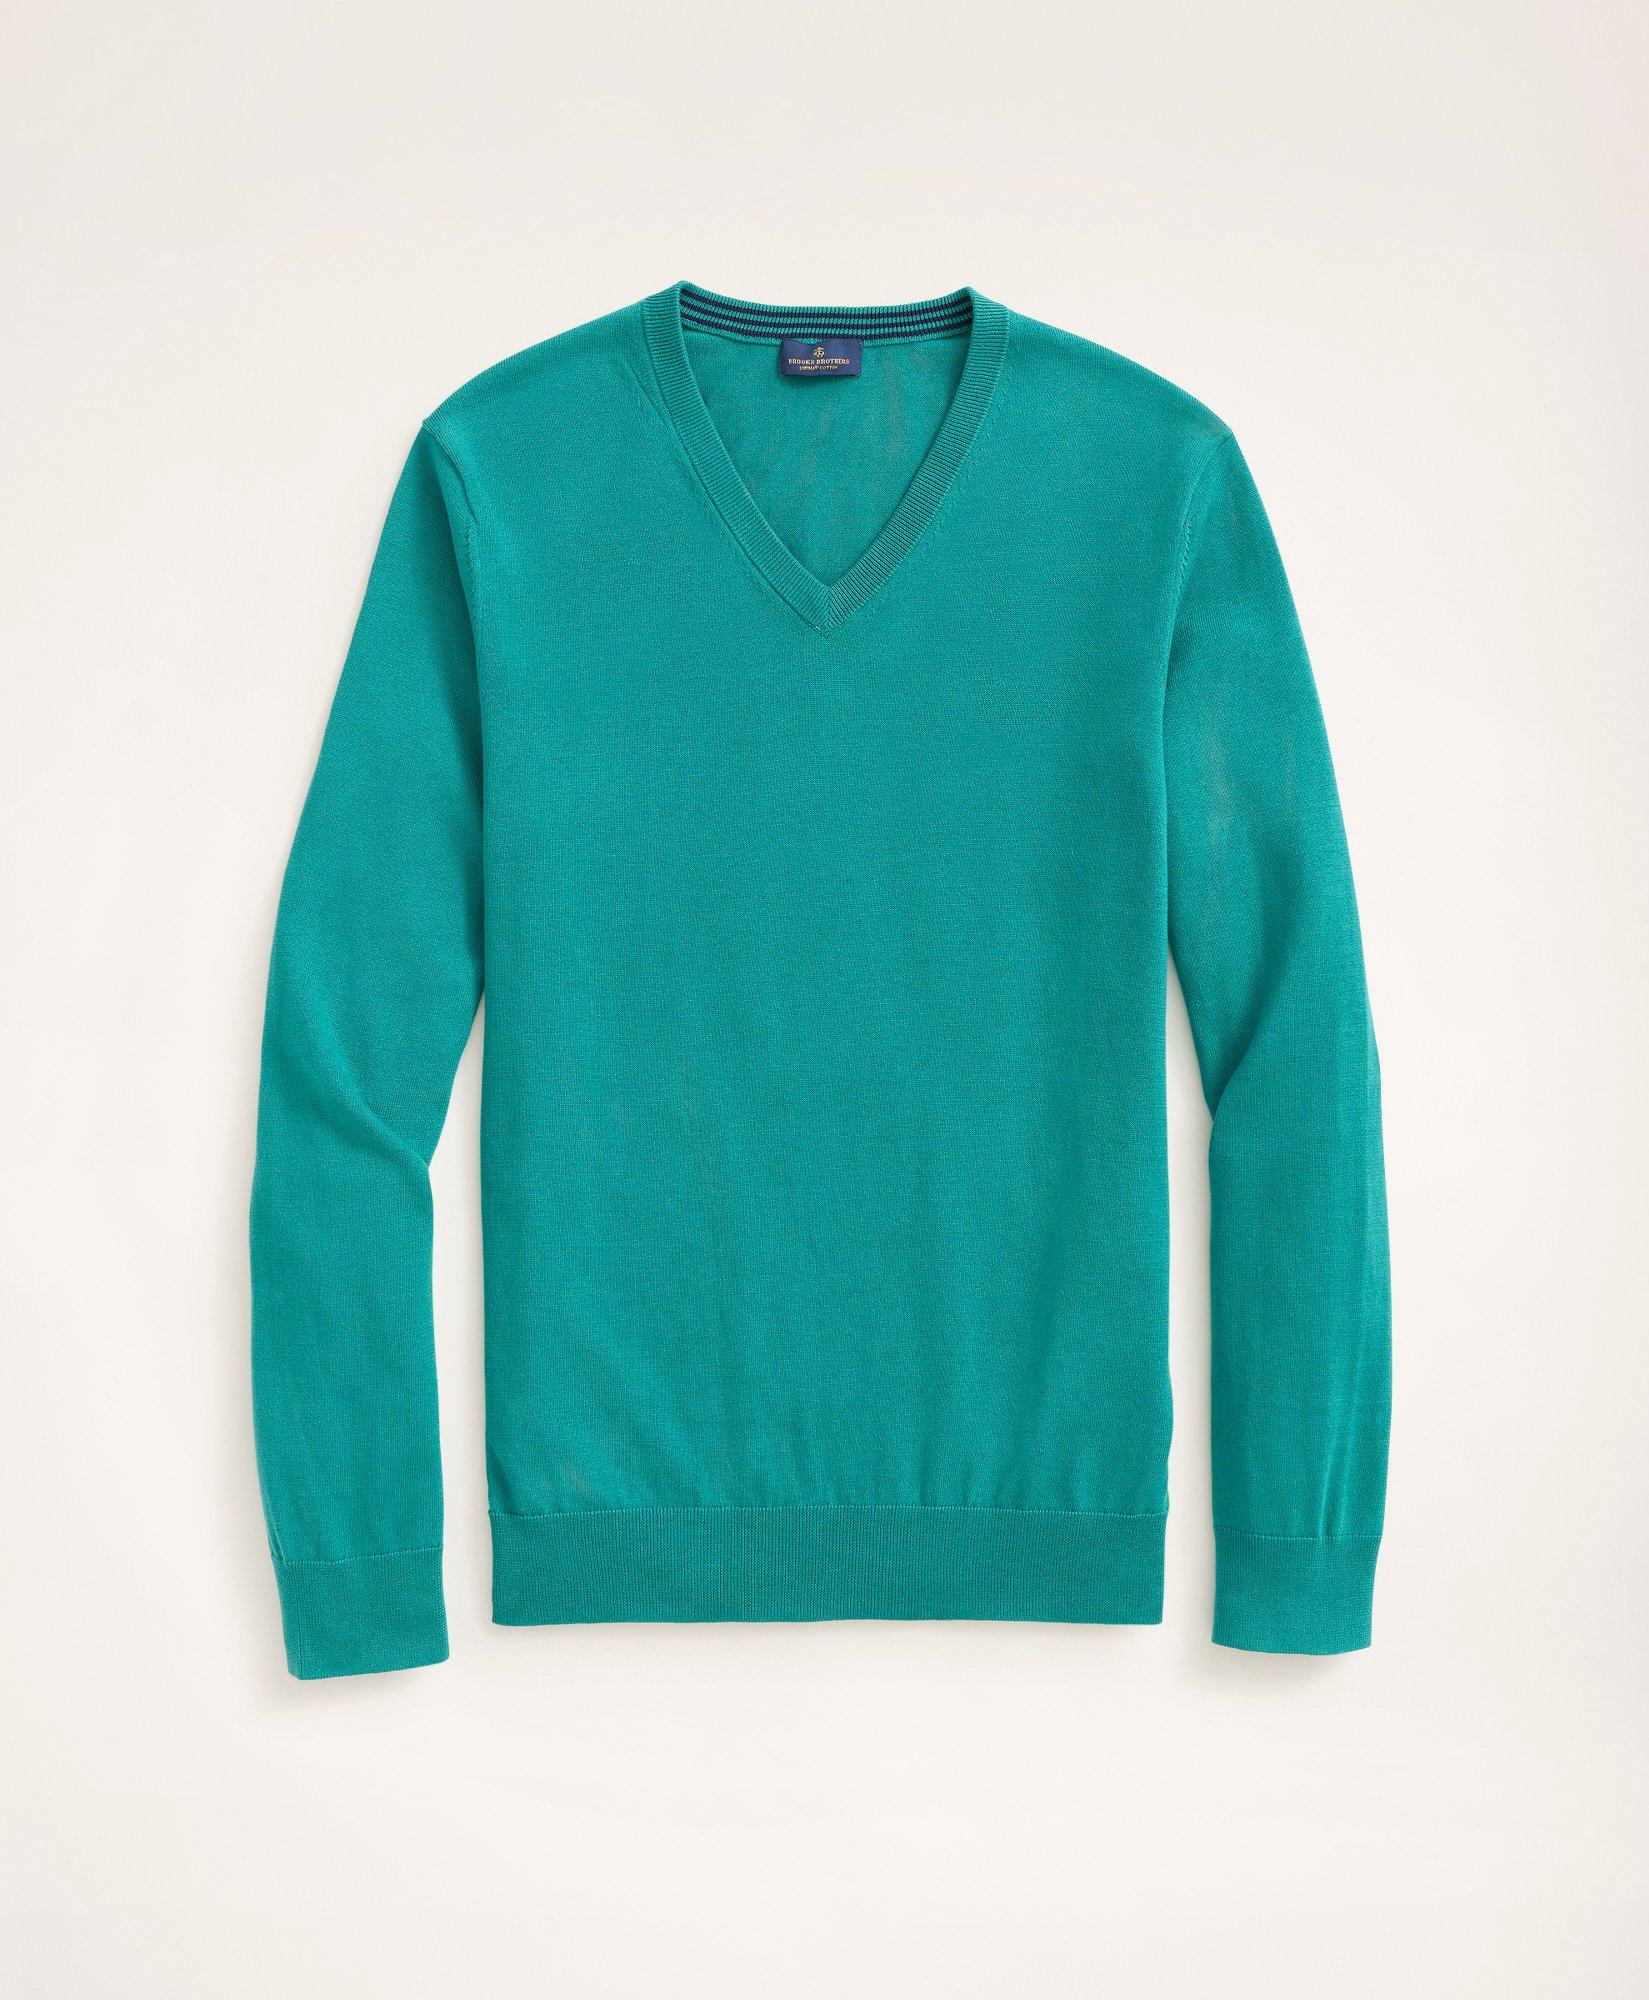 Brooks Brothers Big & Tall Supima Cotton V-neck Sweater | Teal | Size 3x